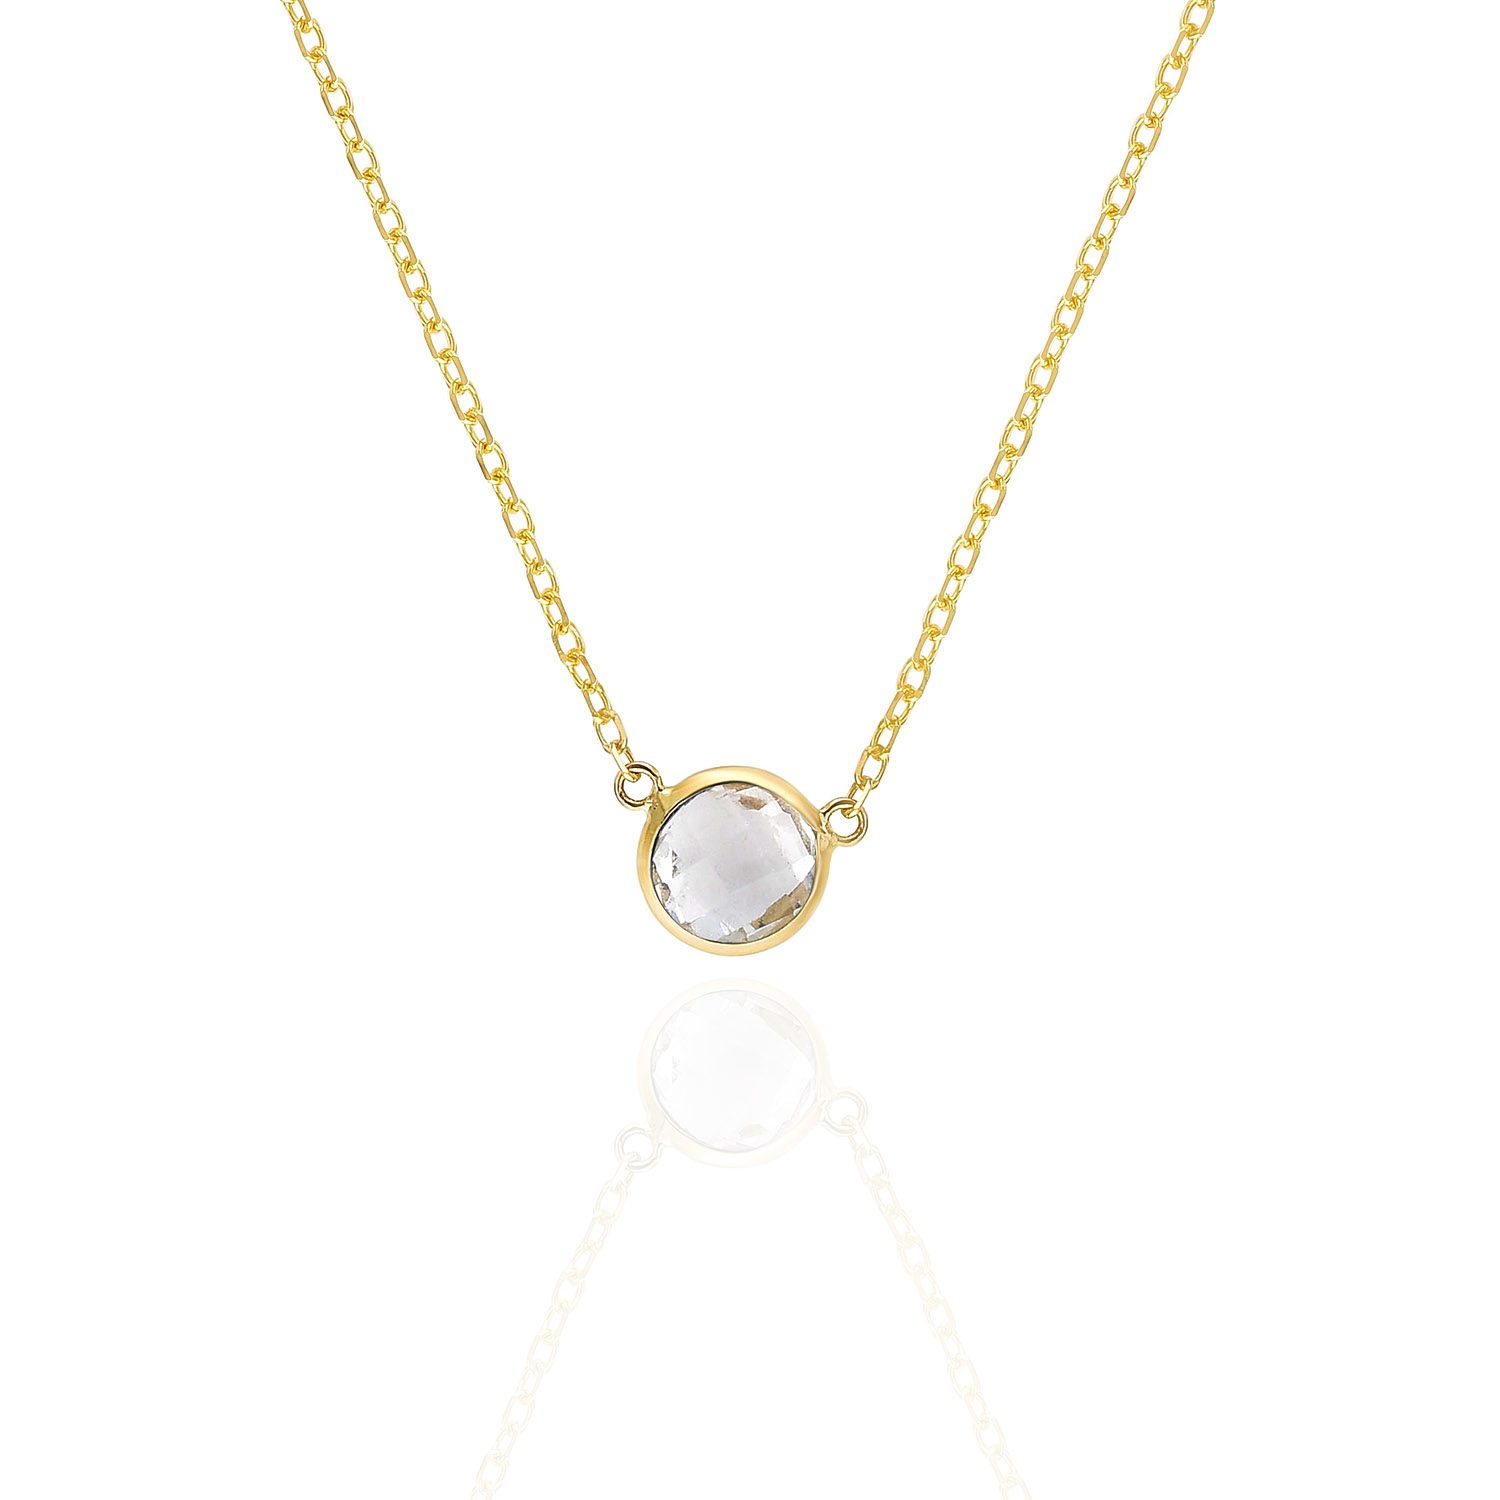 14K Yellow Gold 1Ct Bezel Set Colored Gem Birthstone Necklace Chain 15"-17" - Simulated Diamond